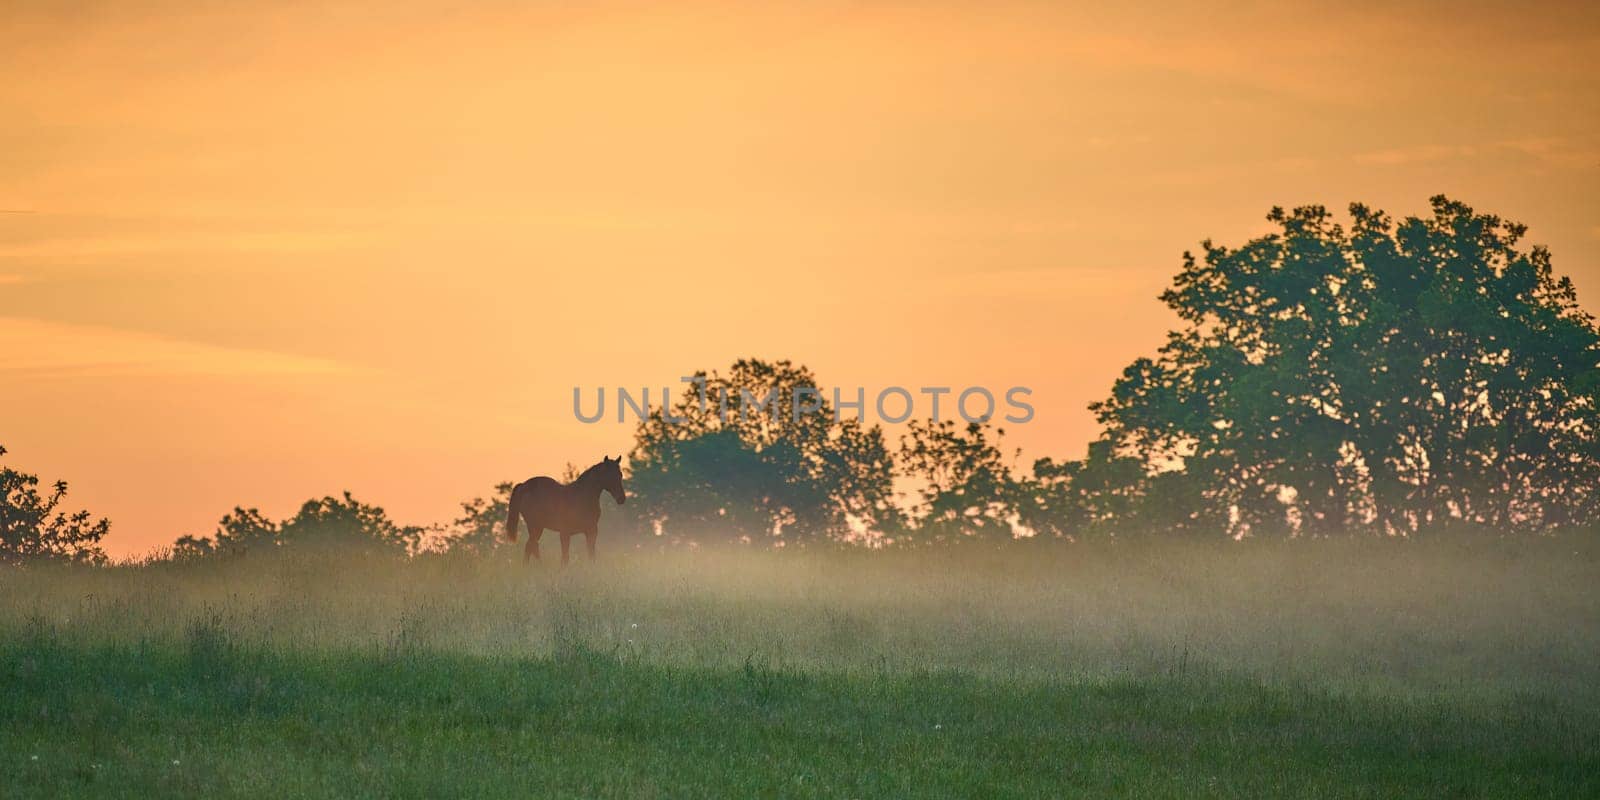 Single horse walking through a foggy field at early dawn morning. by patrickstock